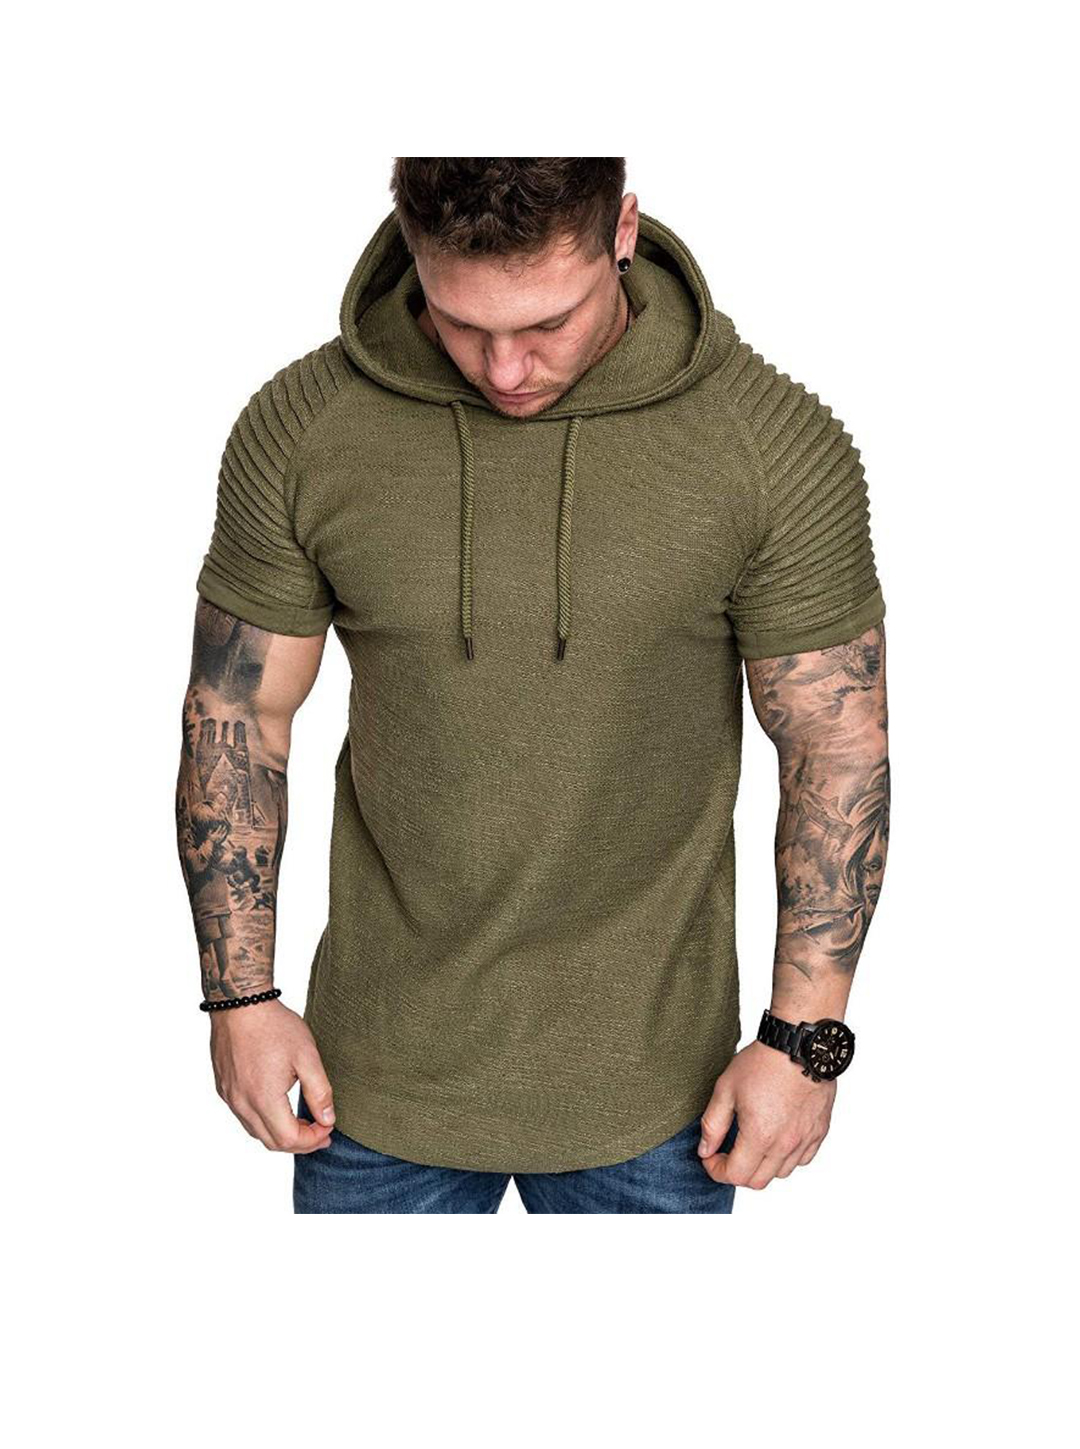 Men's Textured Solid Color Short Sleeve Pullover Hoodie-poisonstreetwear.com